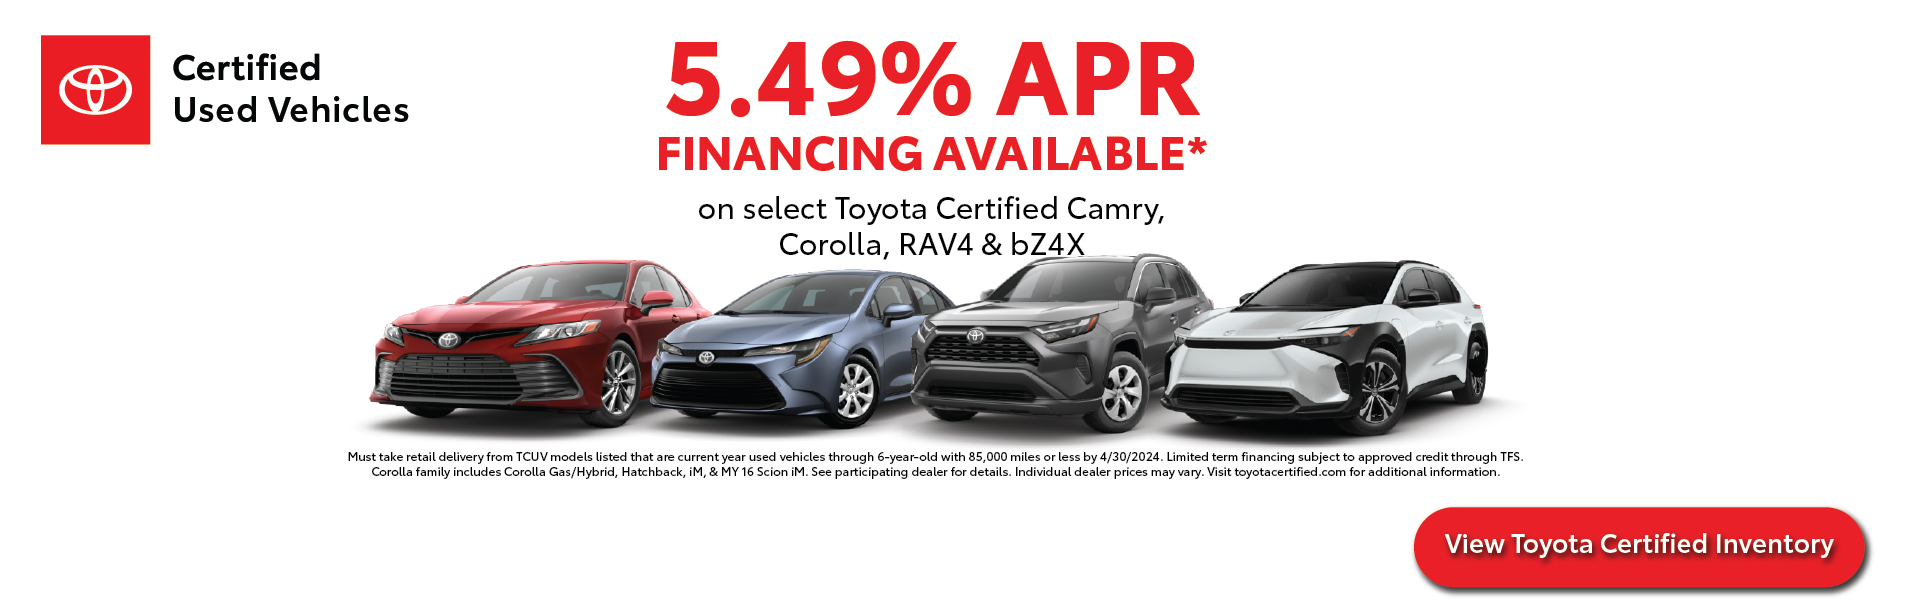 Toyota Certified Used Vehicle Offer | Rochester Toyota in Rochester MN